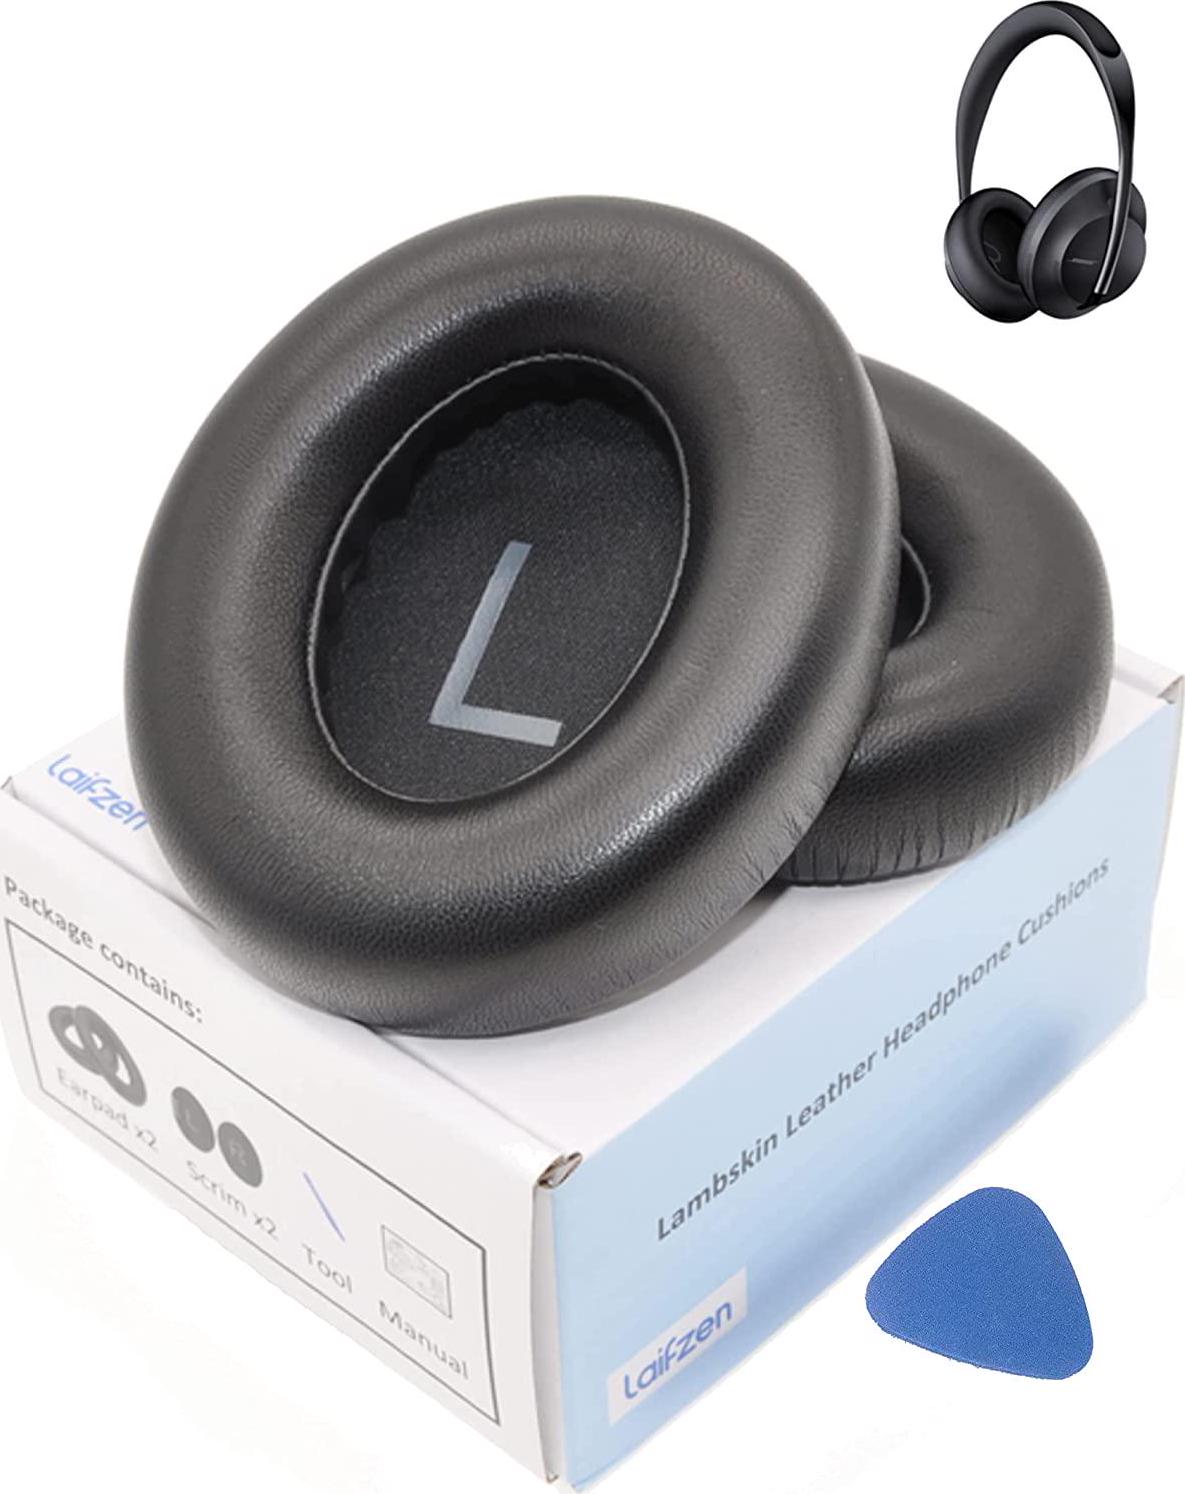 Laifzen, Lambskin Earpads Cushions Replacement Sheepskin Real Leather for Bose Noise Canceling NC700 NC 700 Headphones Ear Pads (Black)